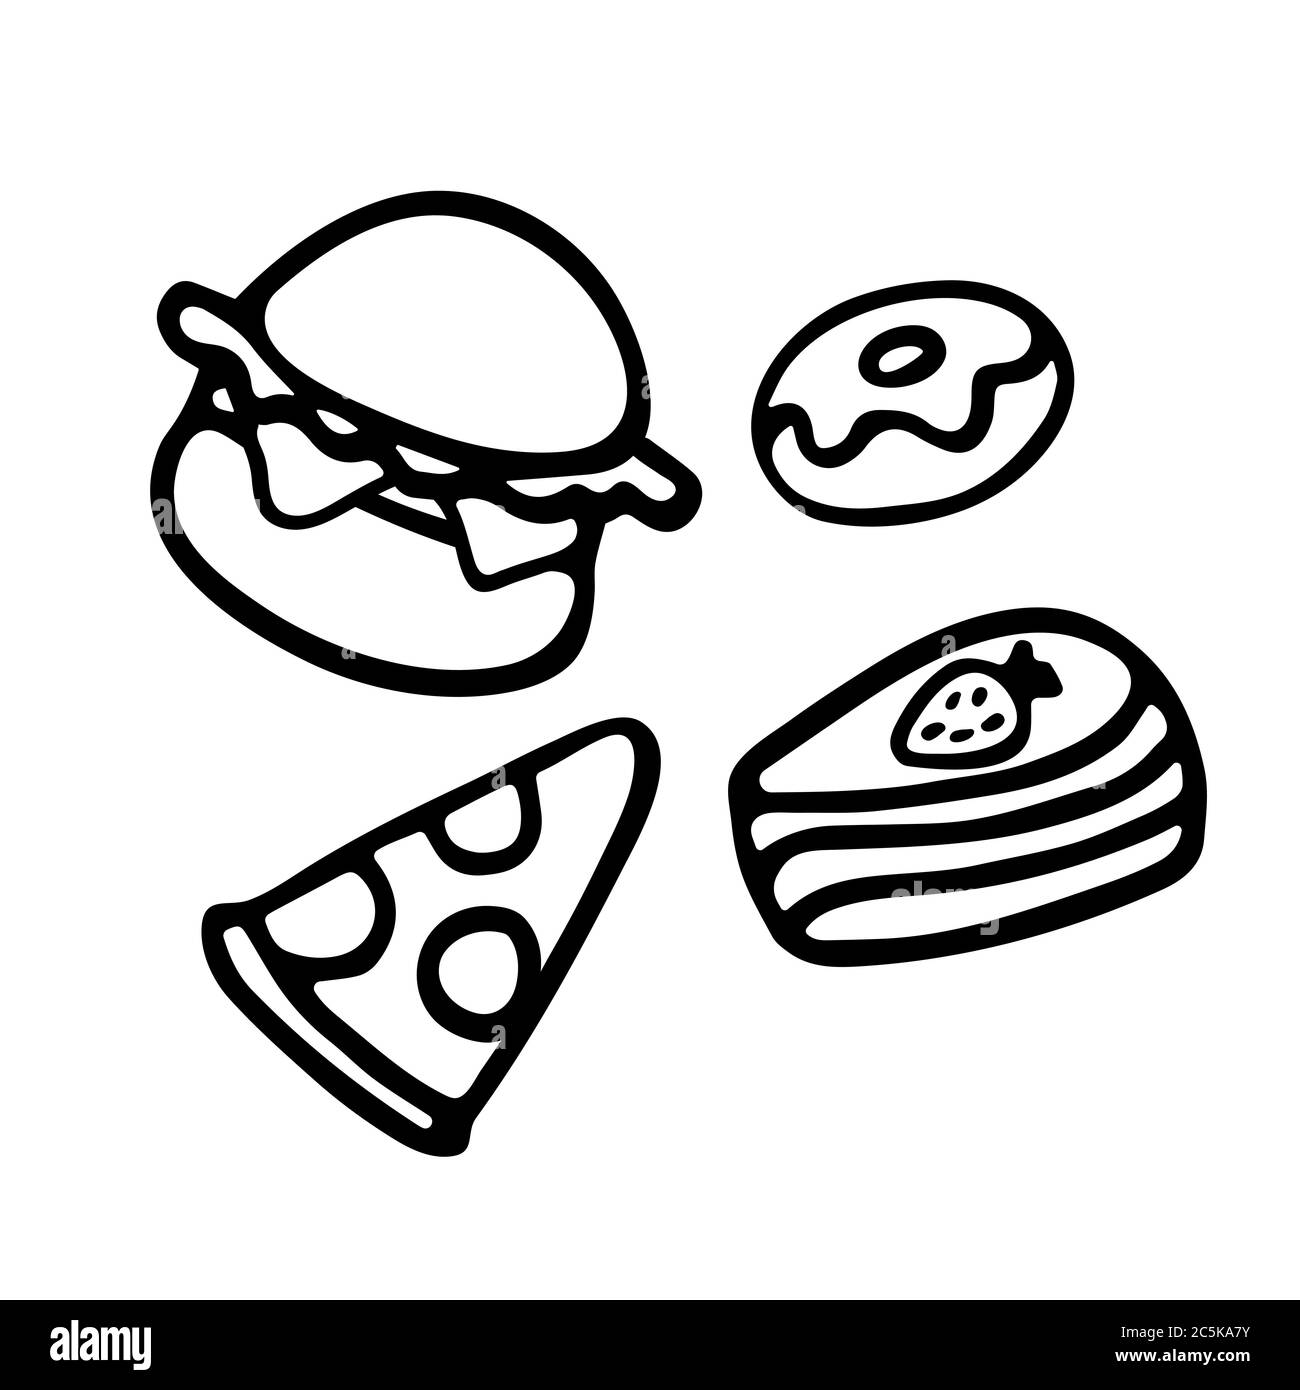 How To Draw For Kids 6-8: A Fun and Simple Grid Copy Method Fast Food Item  Pizza, Burger, Donut Drawing and Coloring Books For Kids To Learn To Draw.